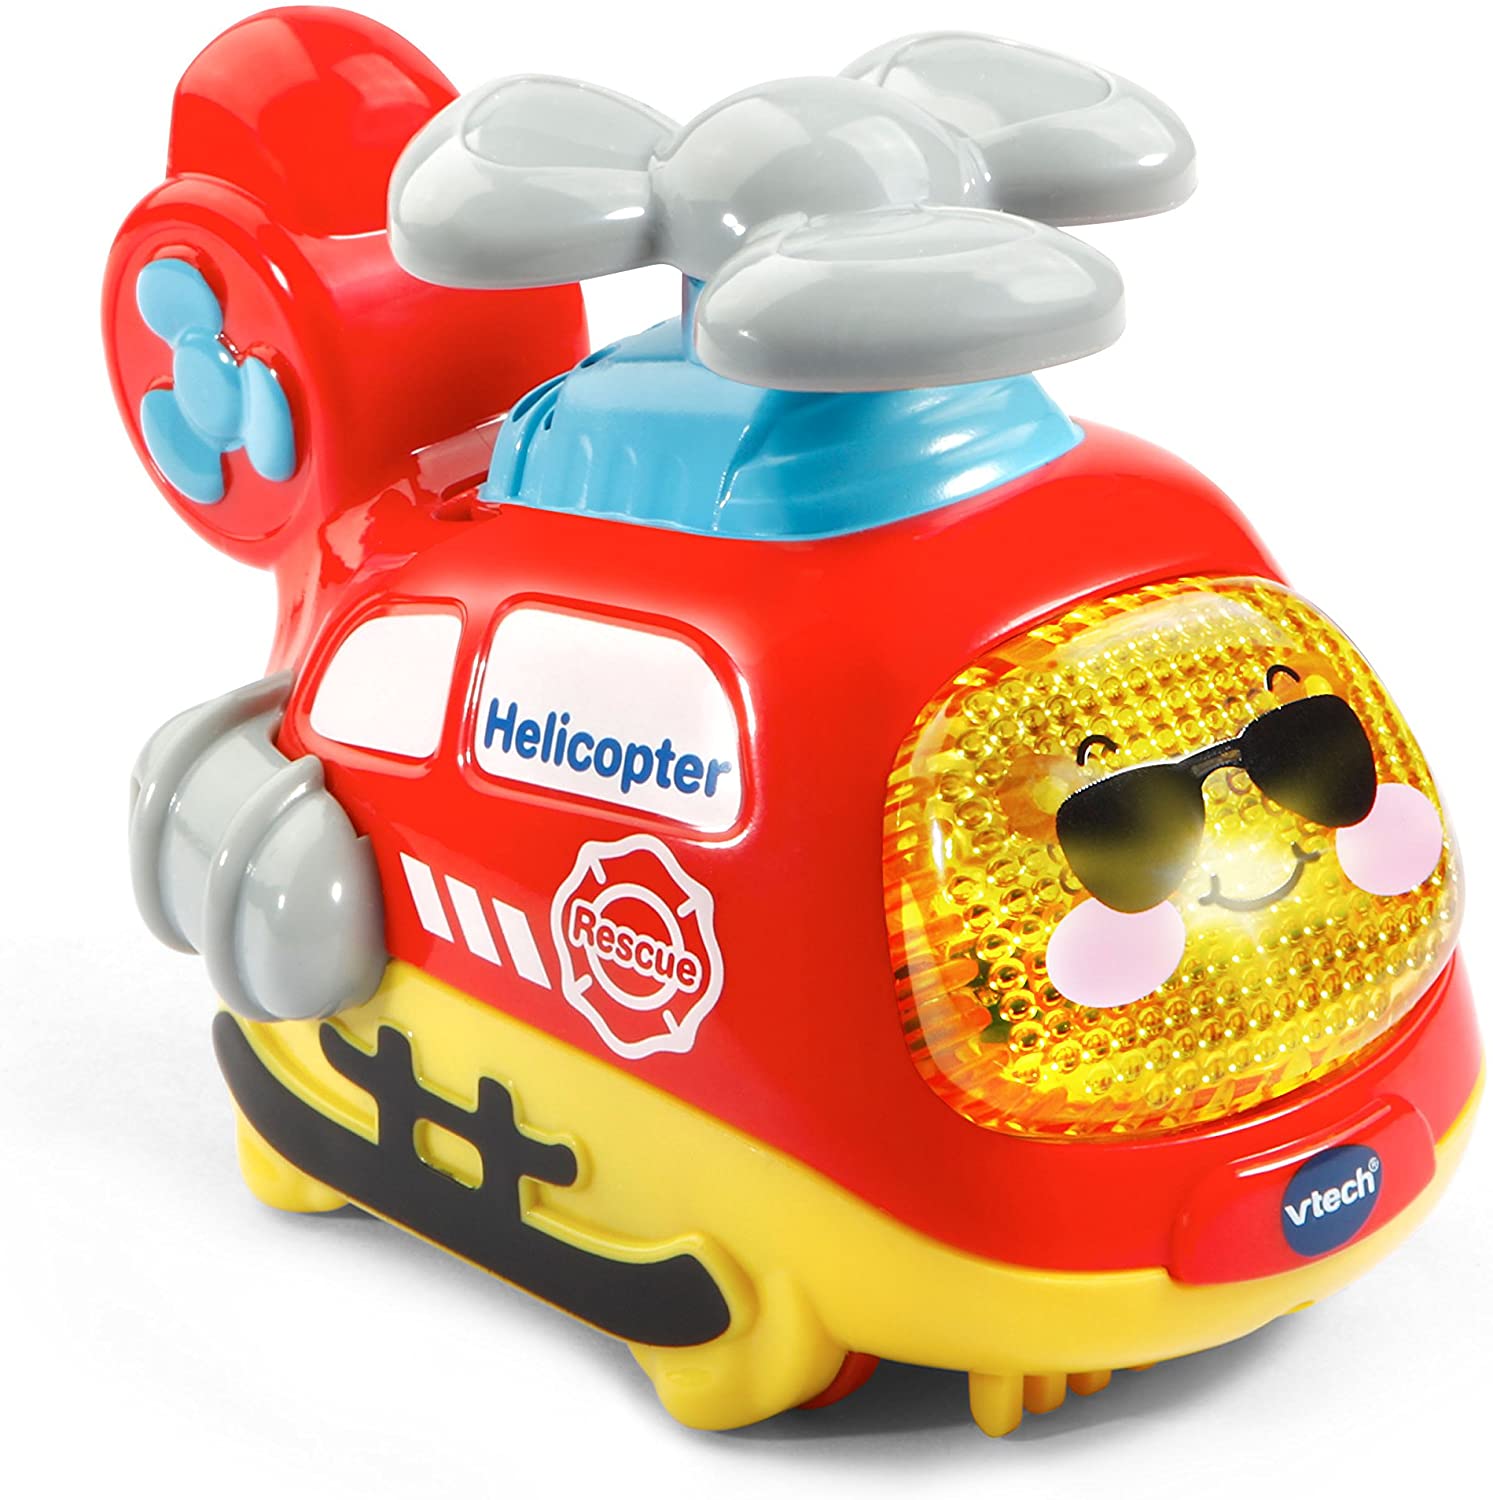 Vtech Toot Toot Rescue Helicopter (80-509403)